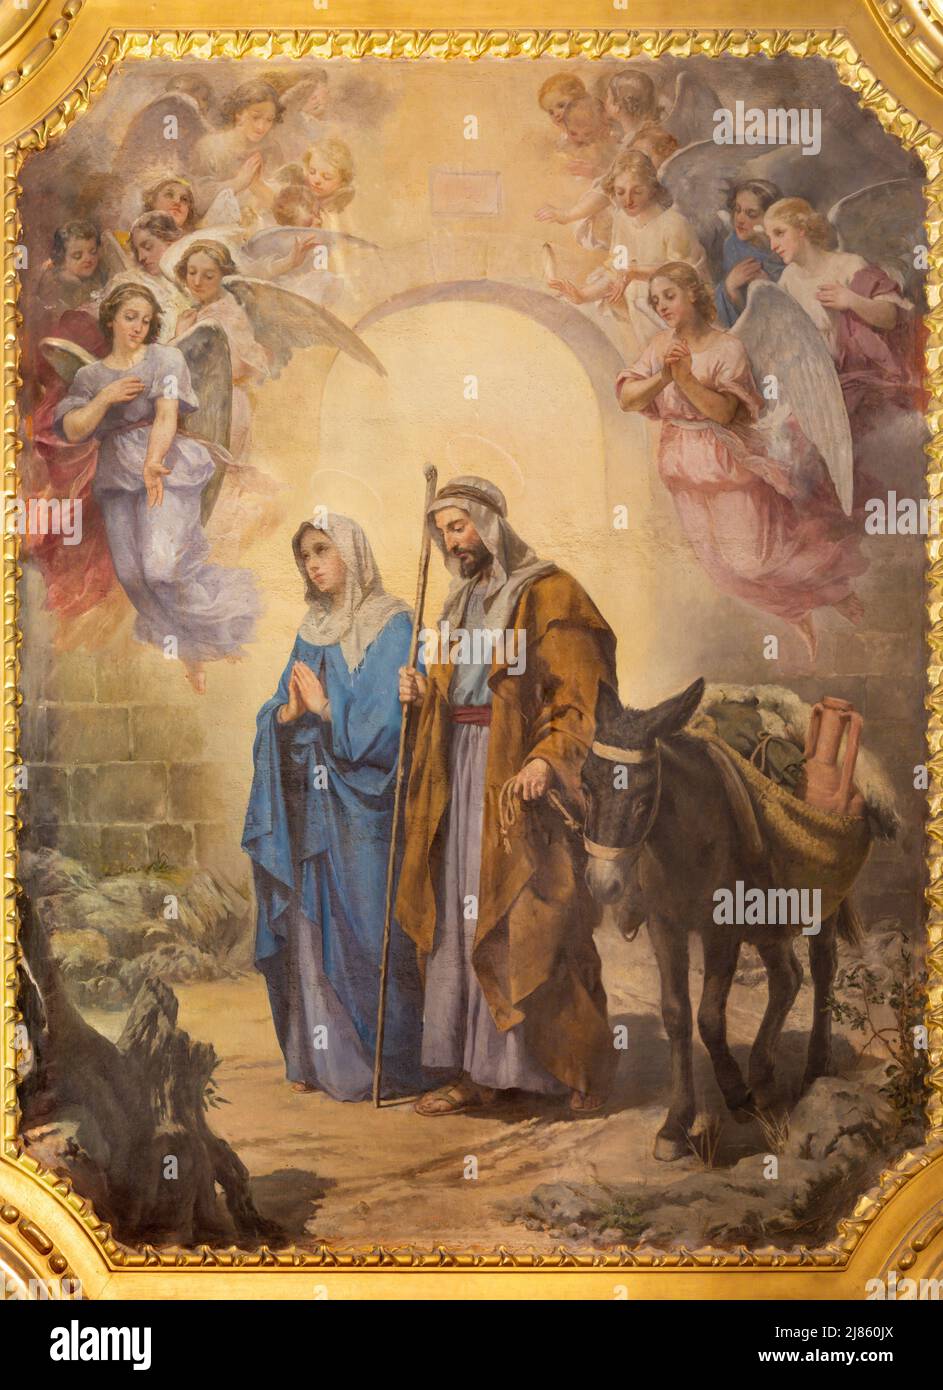 VALENCIA, SPAIN - FEBRUAR 17, 2022: The painting of Flight to Egypt in the church Basilica Sagrado Corazon from year 1897. Stock Photo